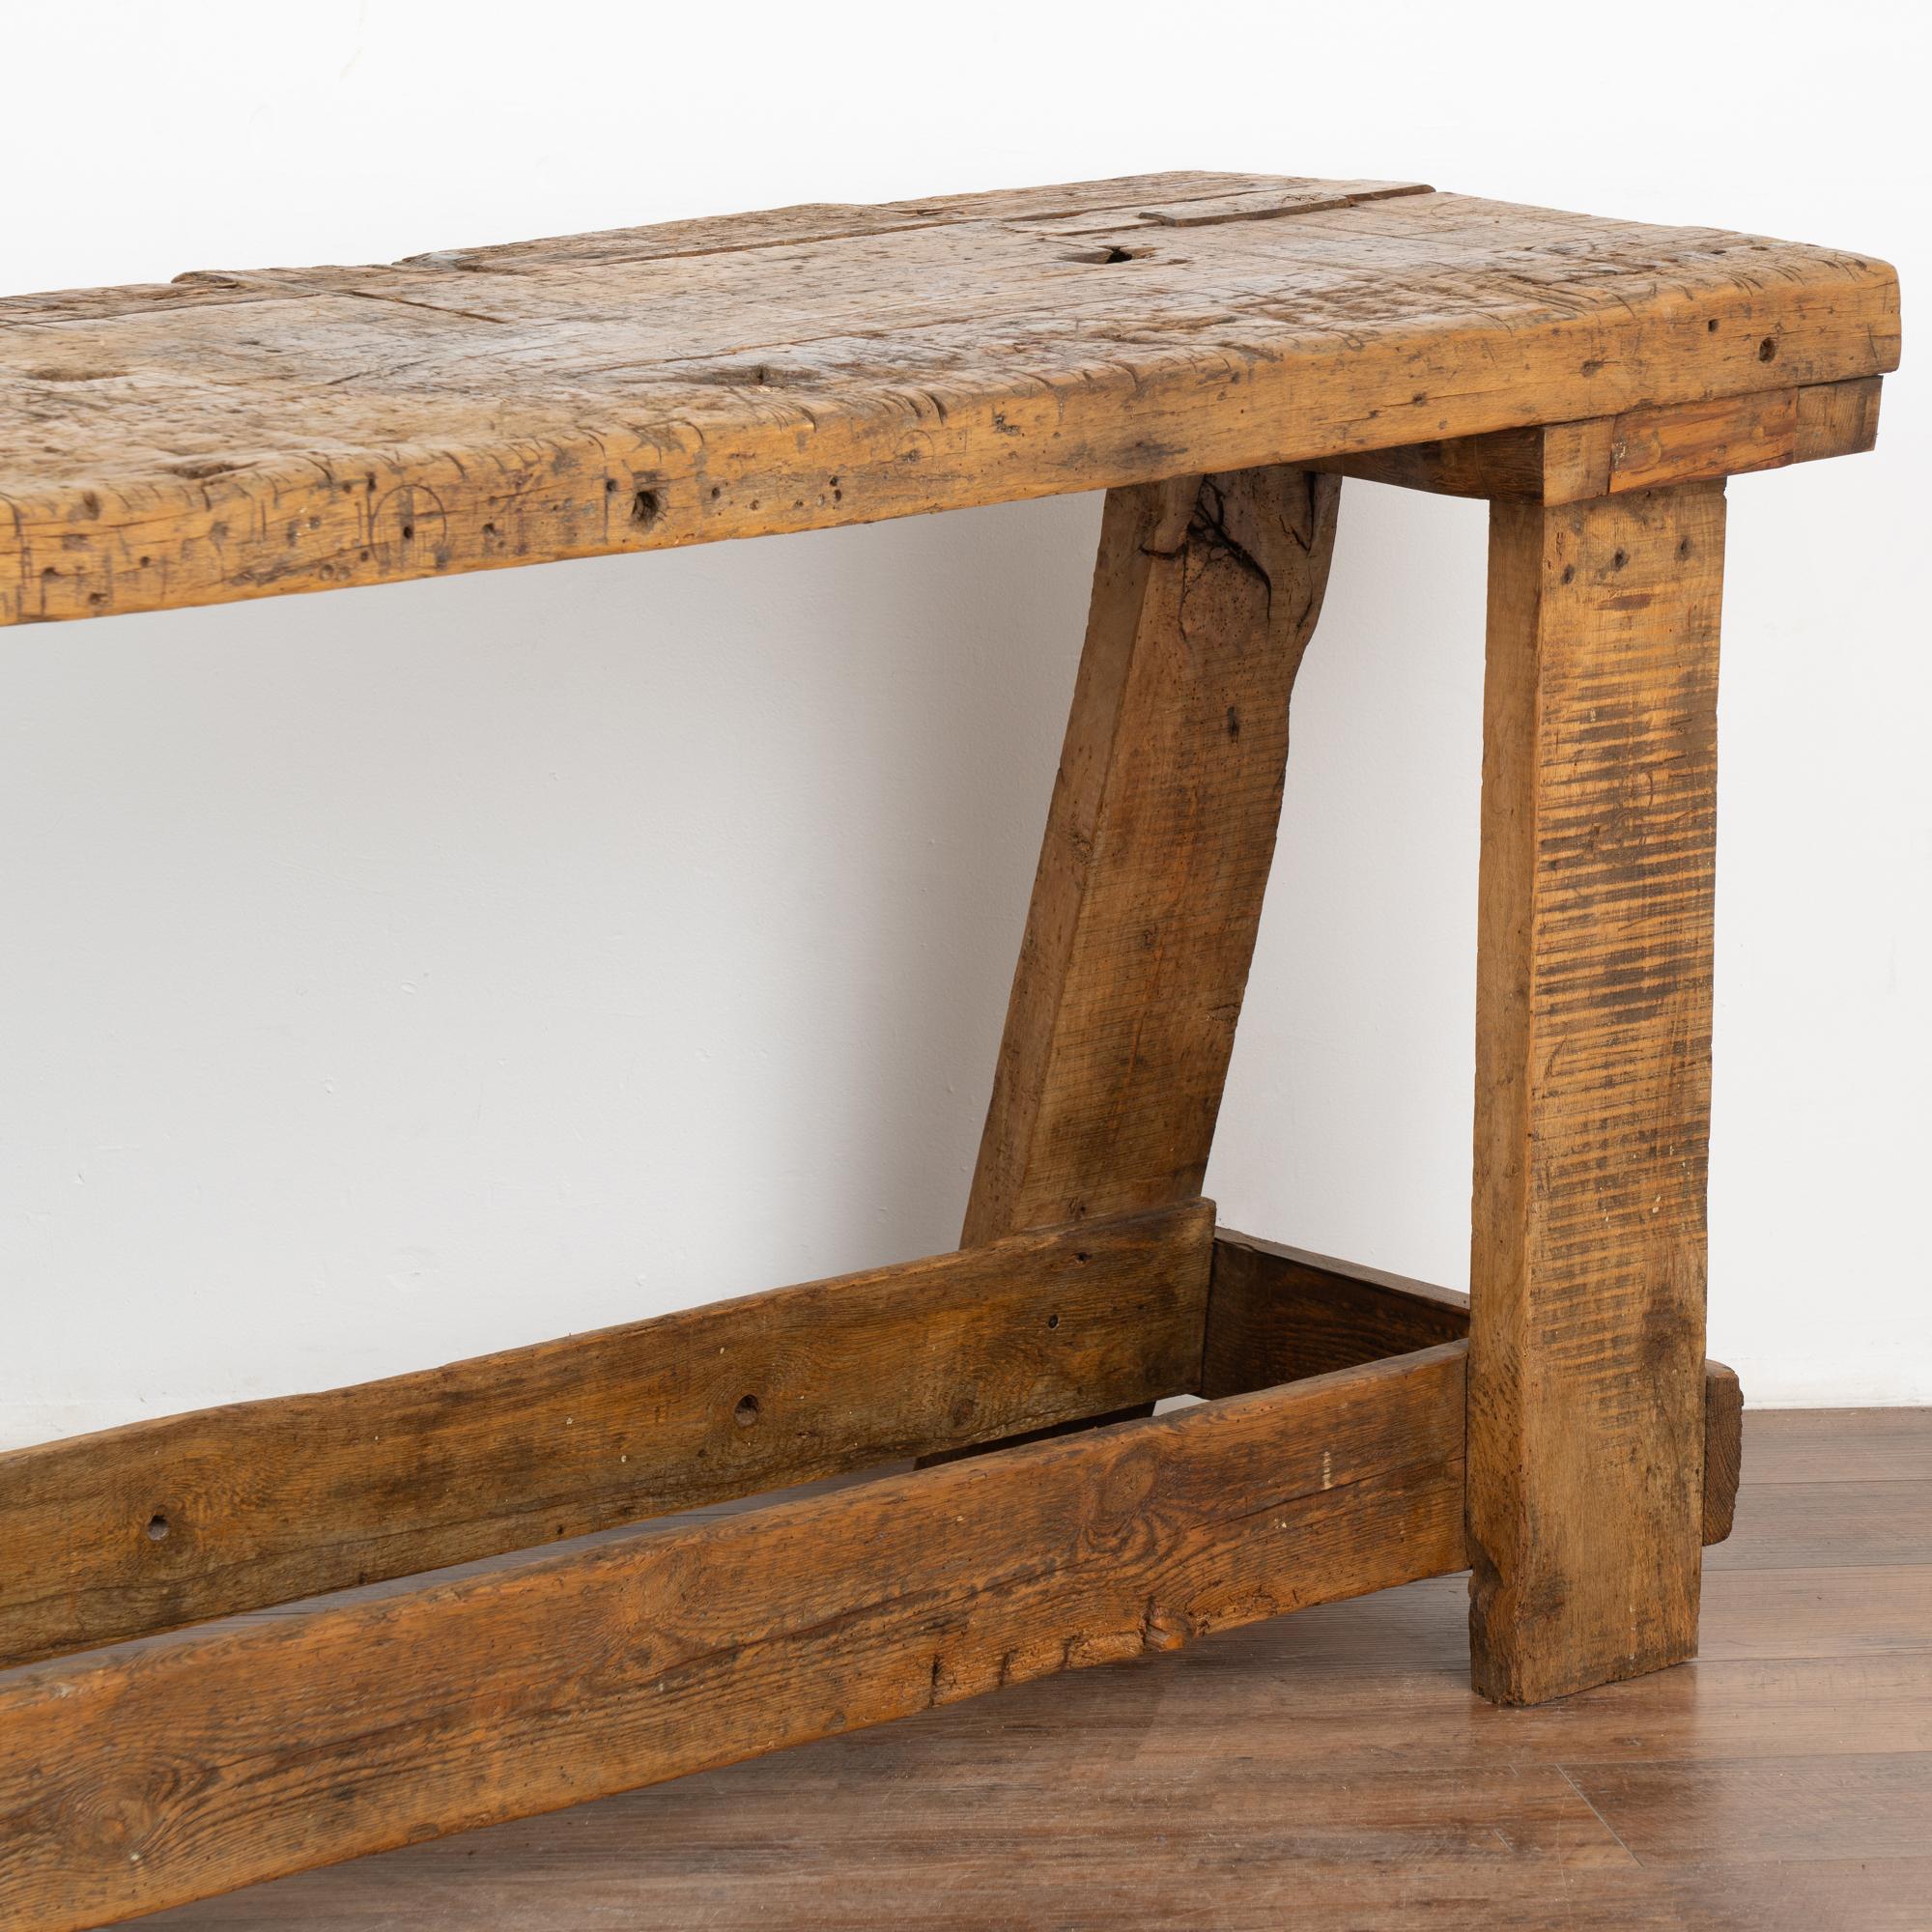 Metal Rustic Console Table Carpenter's Workbench, France circa 1860-80 For Sale